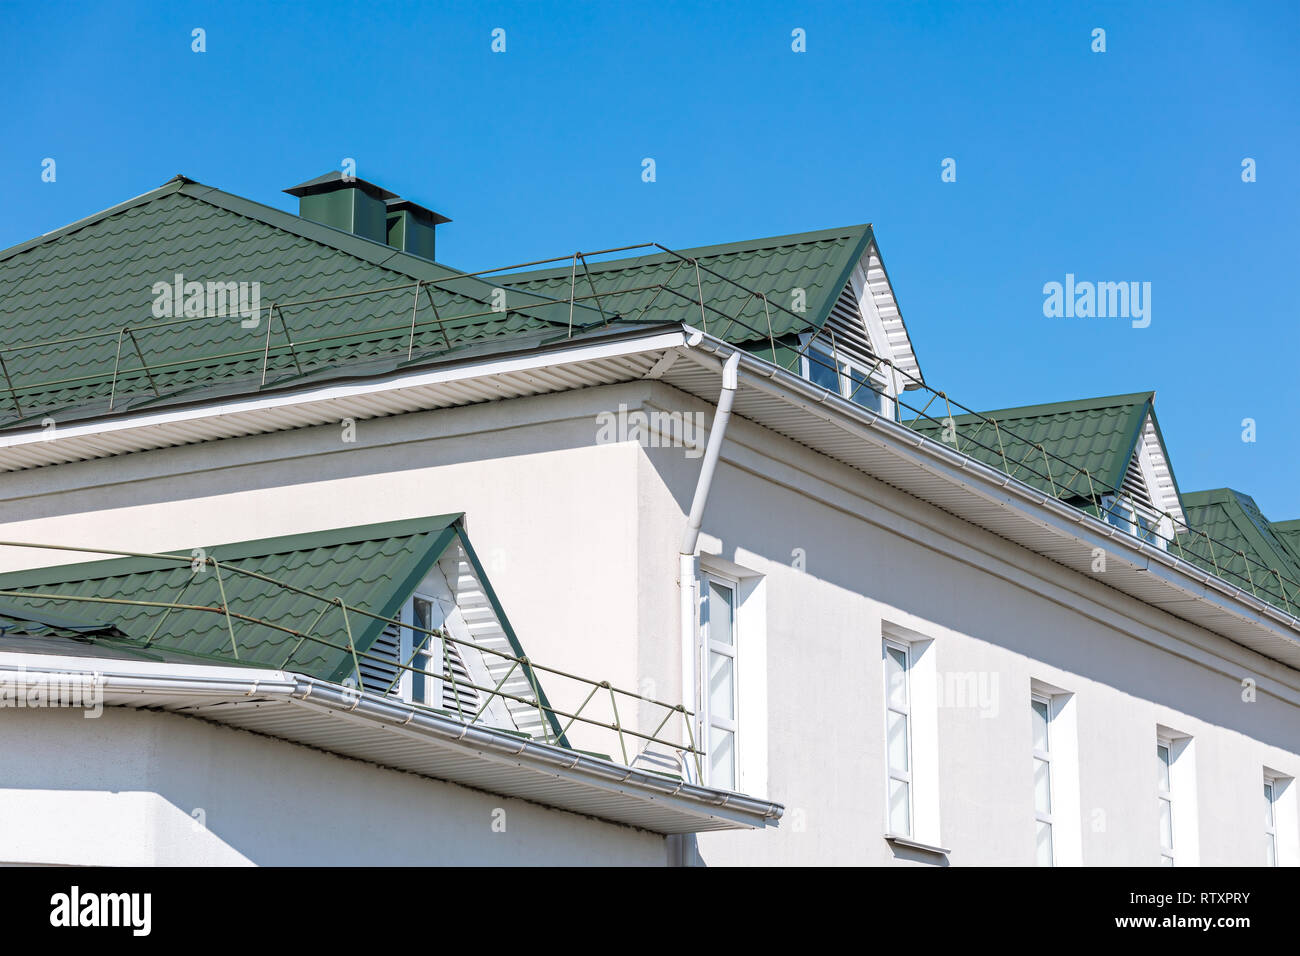 house facade. green rooftop with white metal gutter and downspout. blue sky background Stock Photo